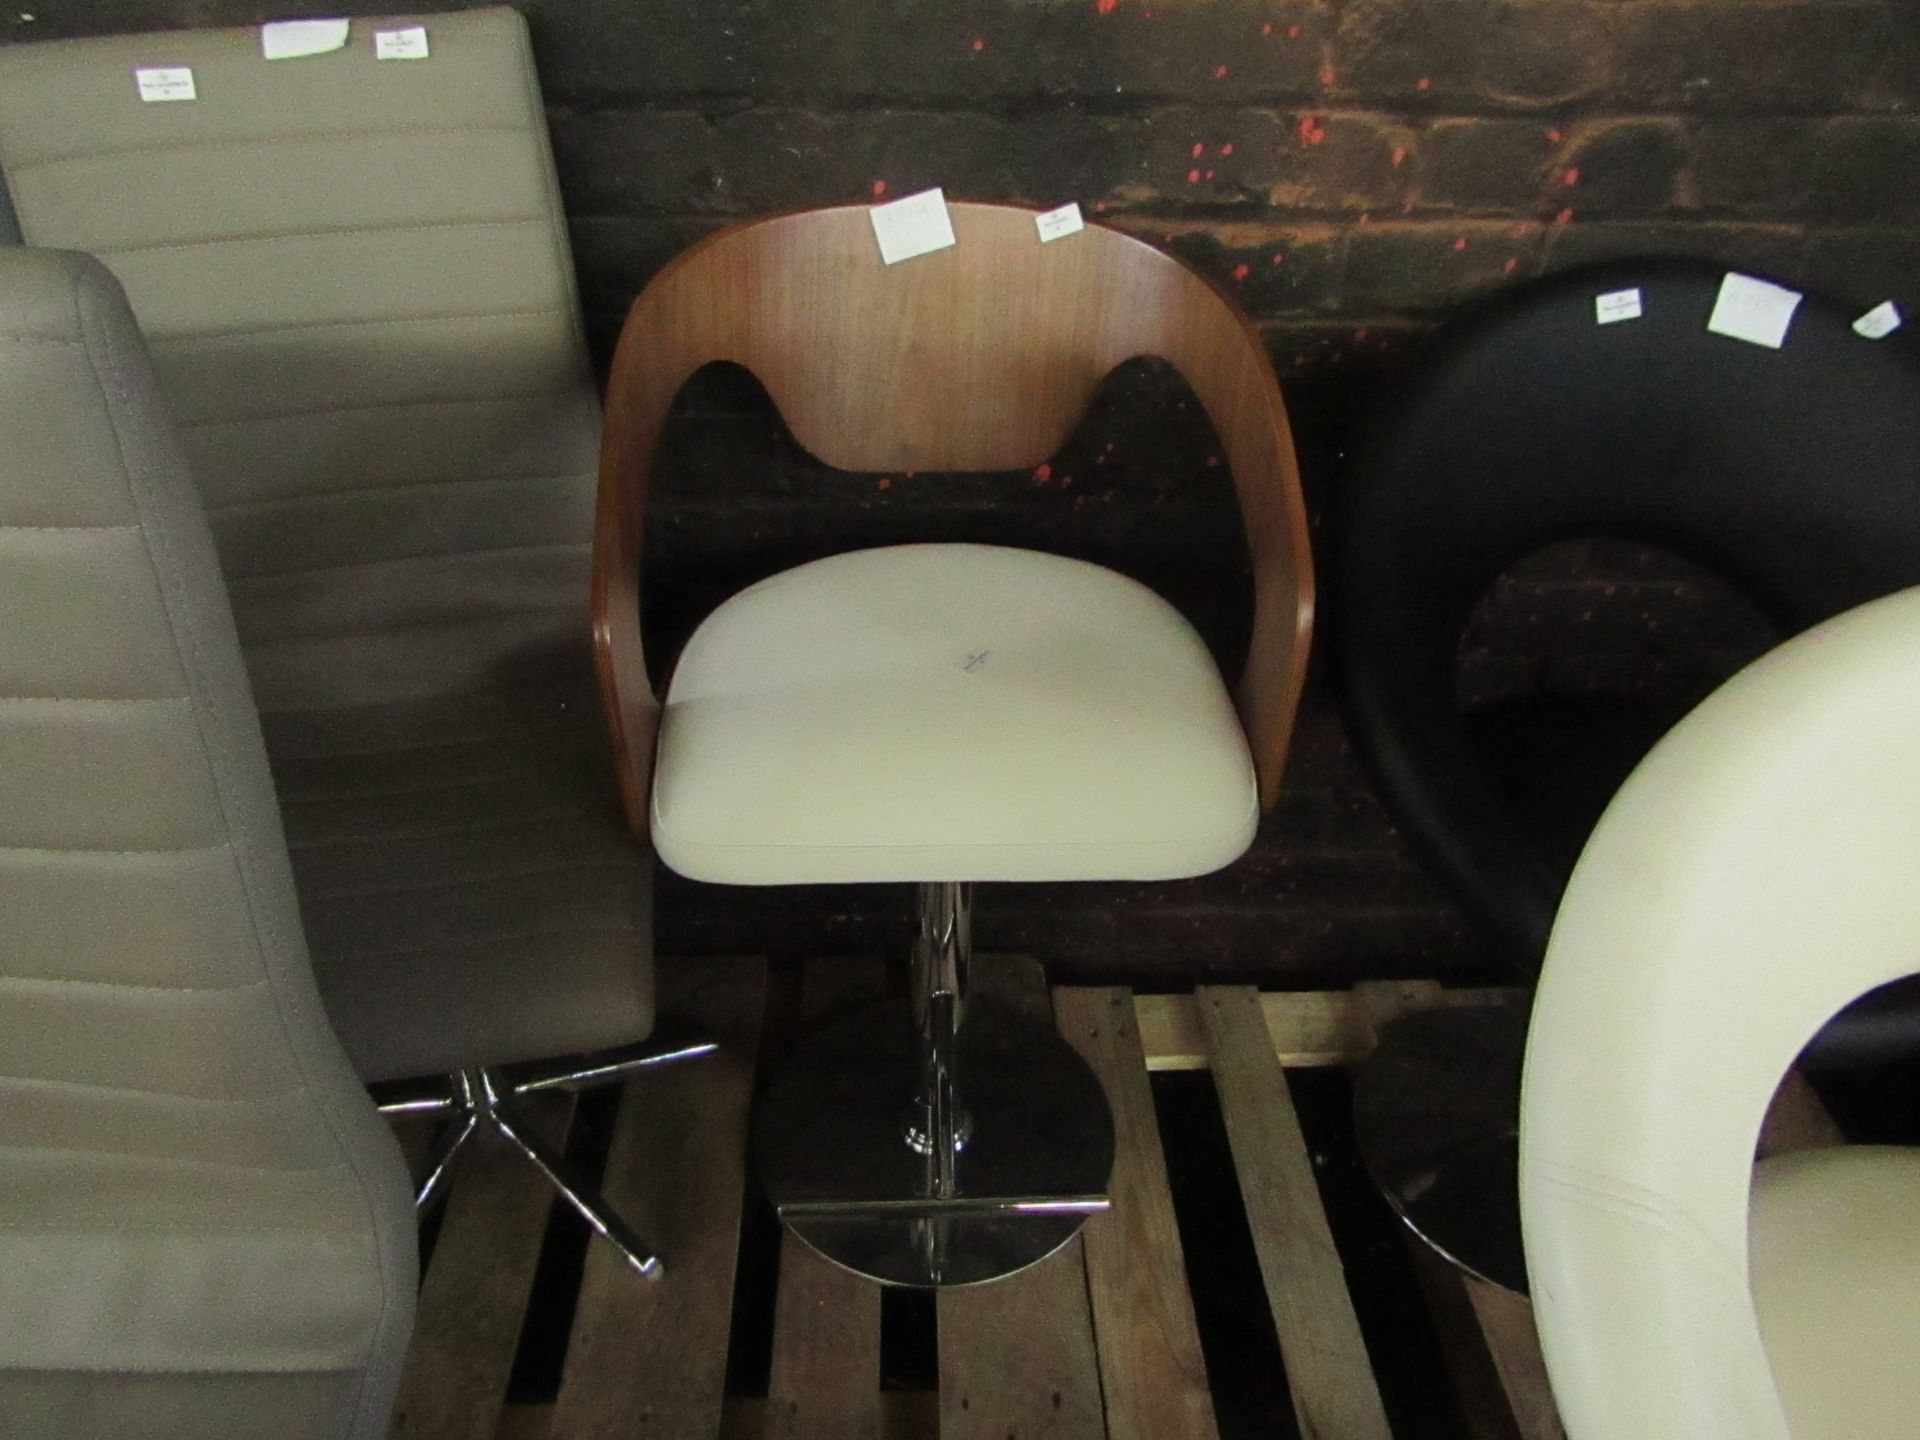 1x Cream Office Chair - Missing one wheel - Some marks on the leather but otherwise okay